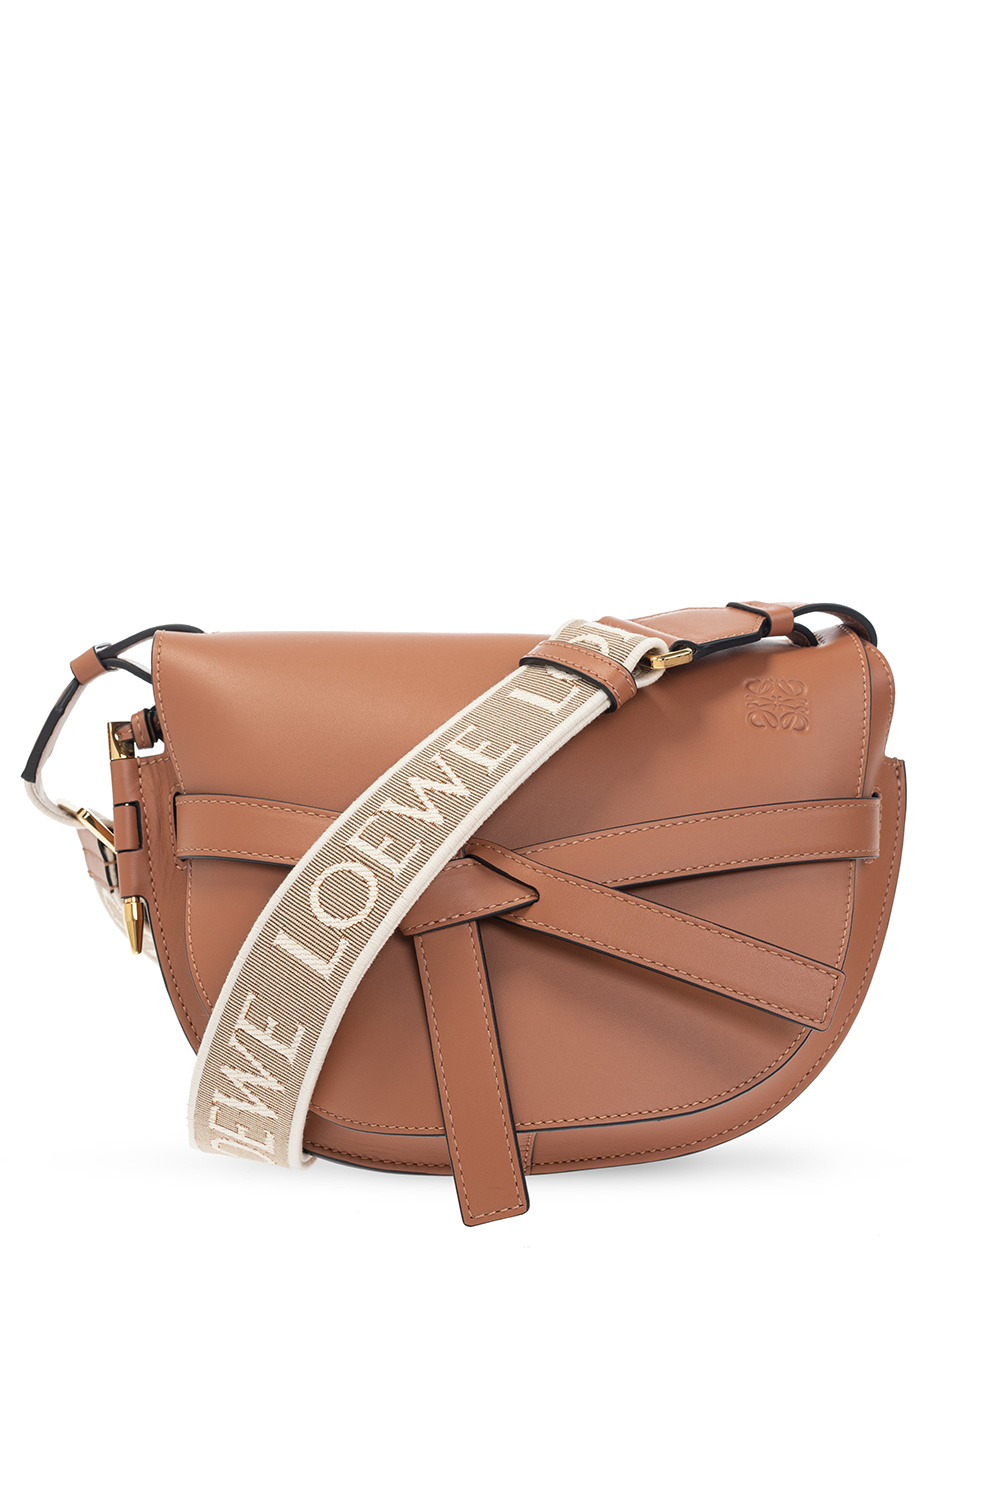 LOEWE Gate Small Leather Crossbody Bag for Women